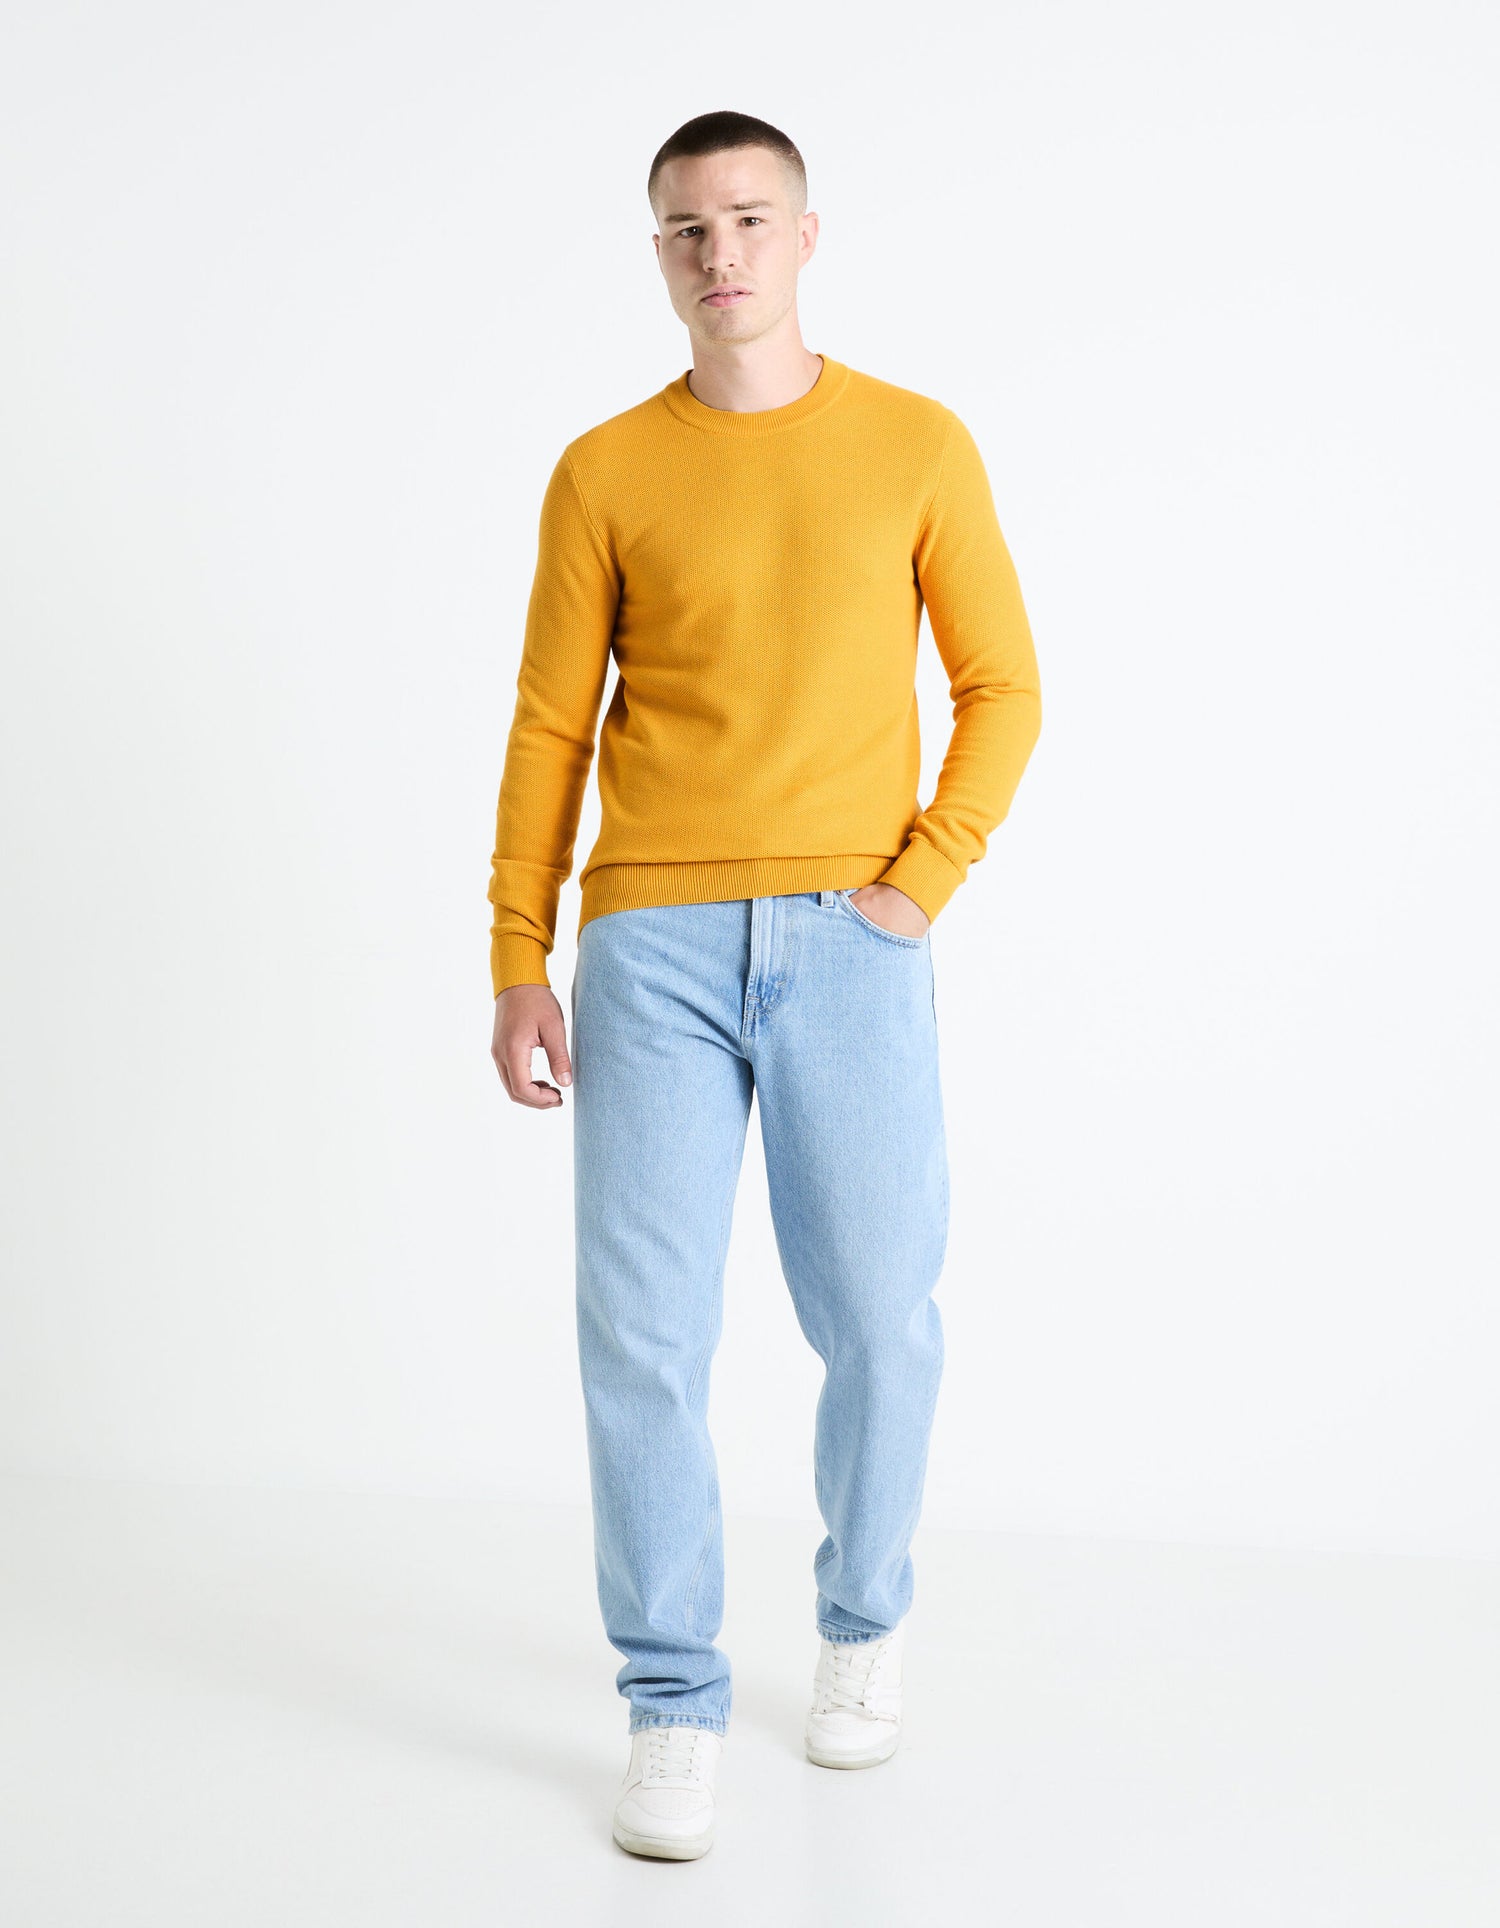 100% Cotton Round Neck Sweater - Yellow_BEPIC_JAUNE MOUTARDE_03